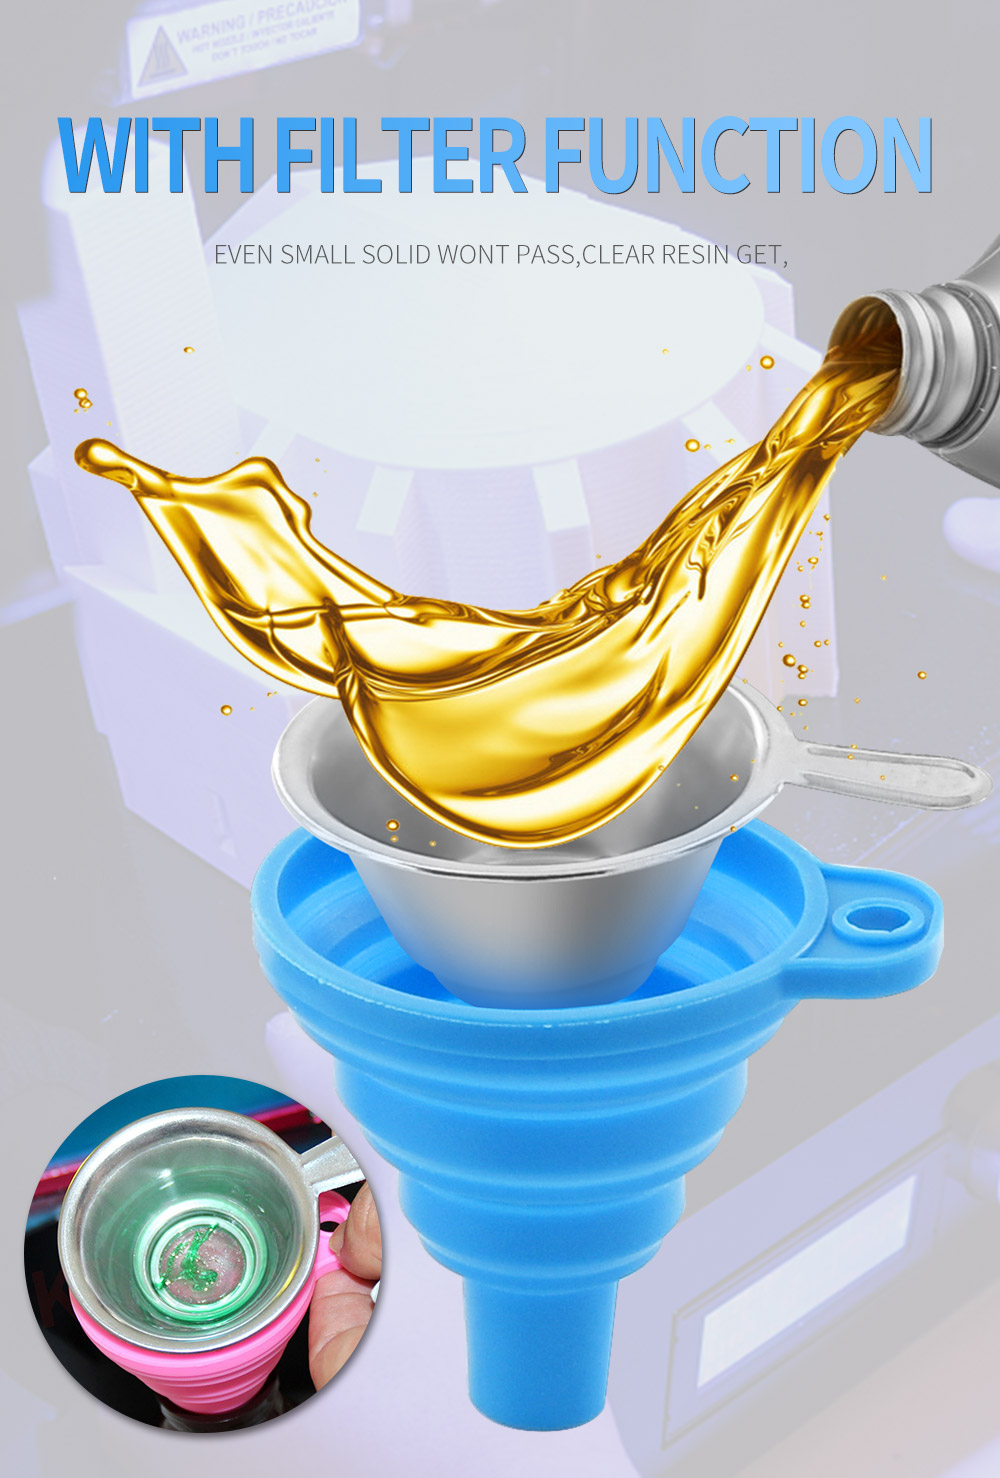 TWO-TREESreg-Collapsible-Silicone-Funnels-and-Stainless-Steel-Resin-Filter-Cups-for-Pouring-Resin-Ba-1875450-1